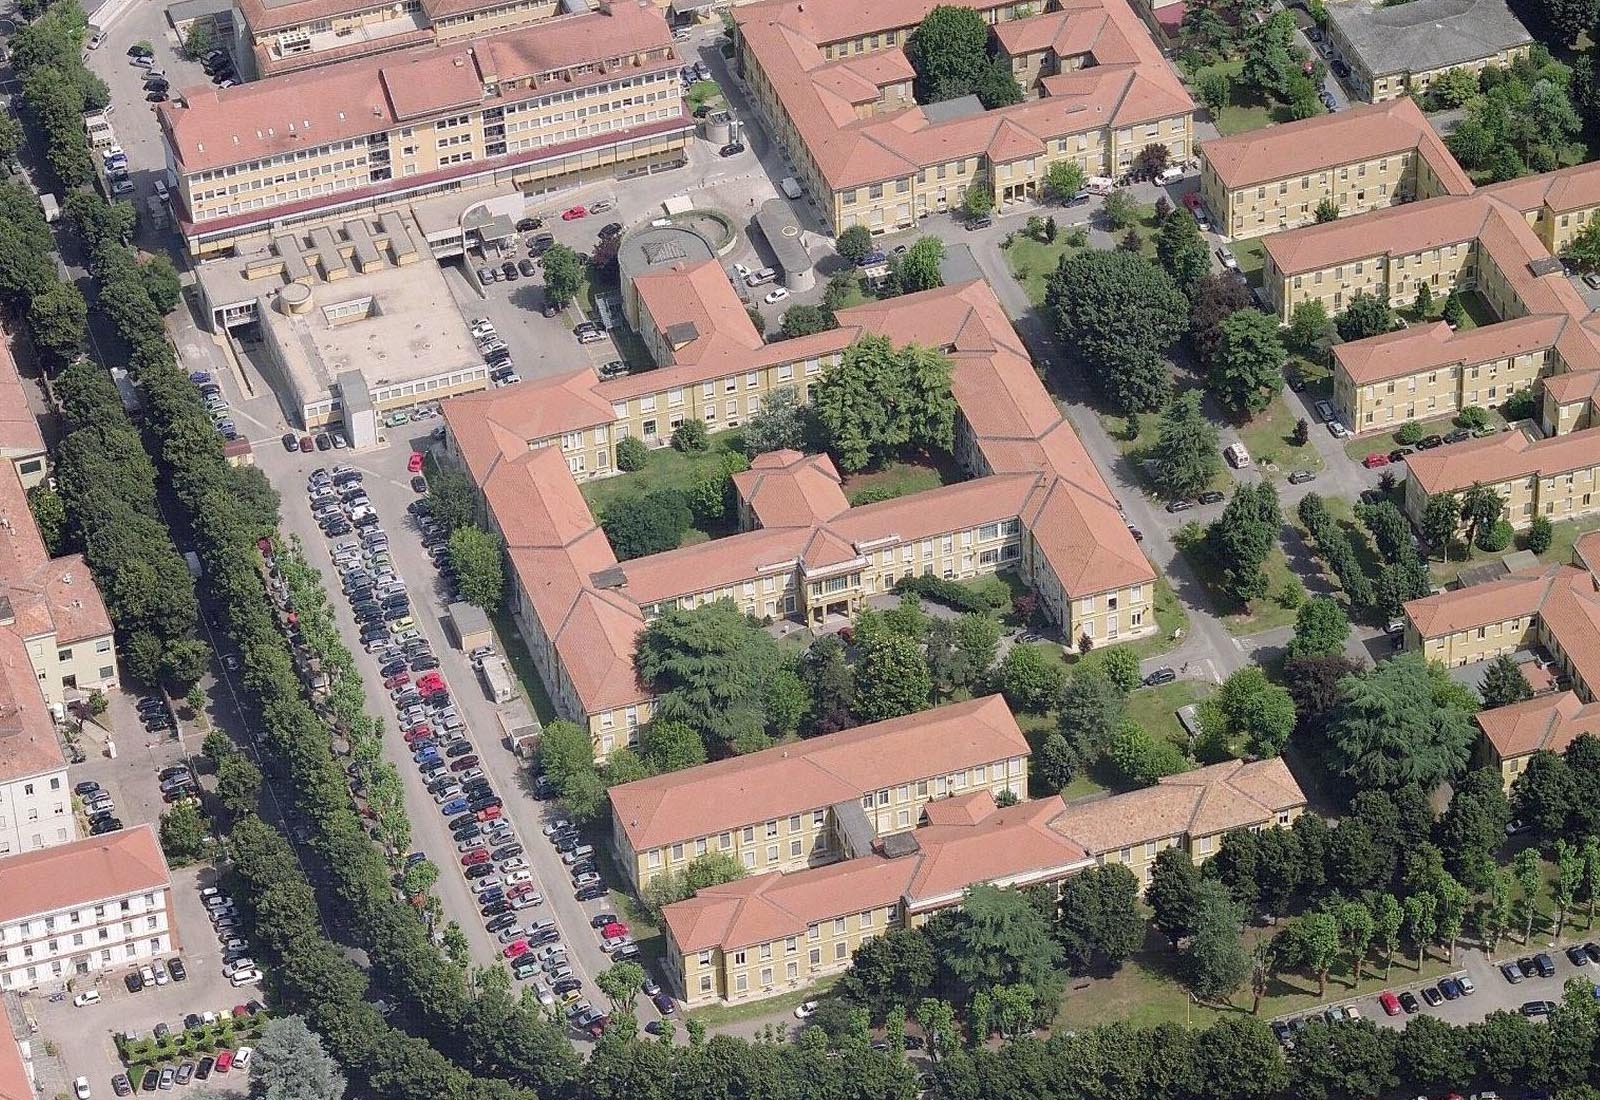 Hospital buildings in Policlinico San Matteo in Pavia - Pavilion 7 - Aerial view